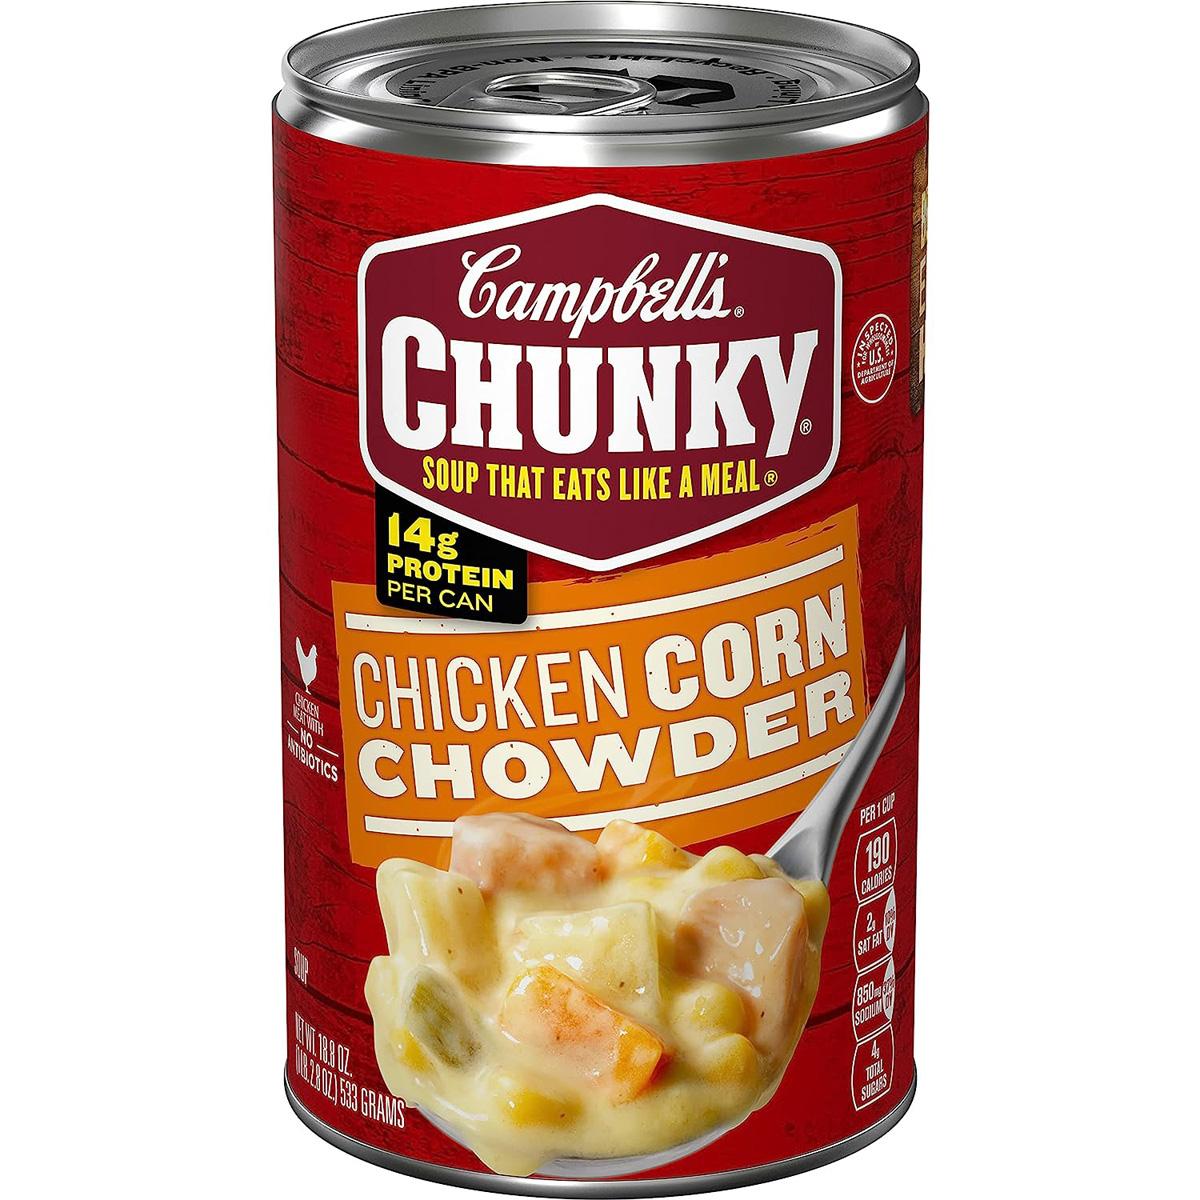 Campbells Chicken Corn Chowder Chunky Soup for $1.27